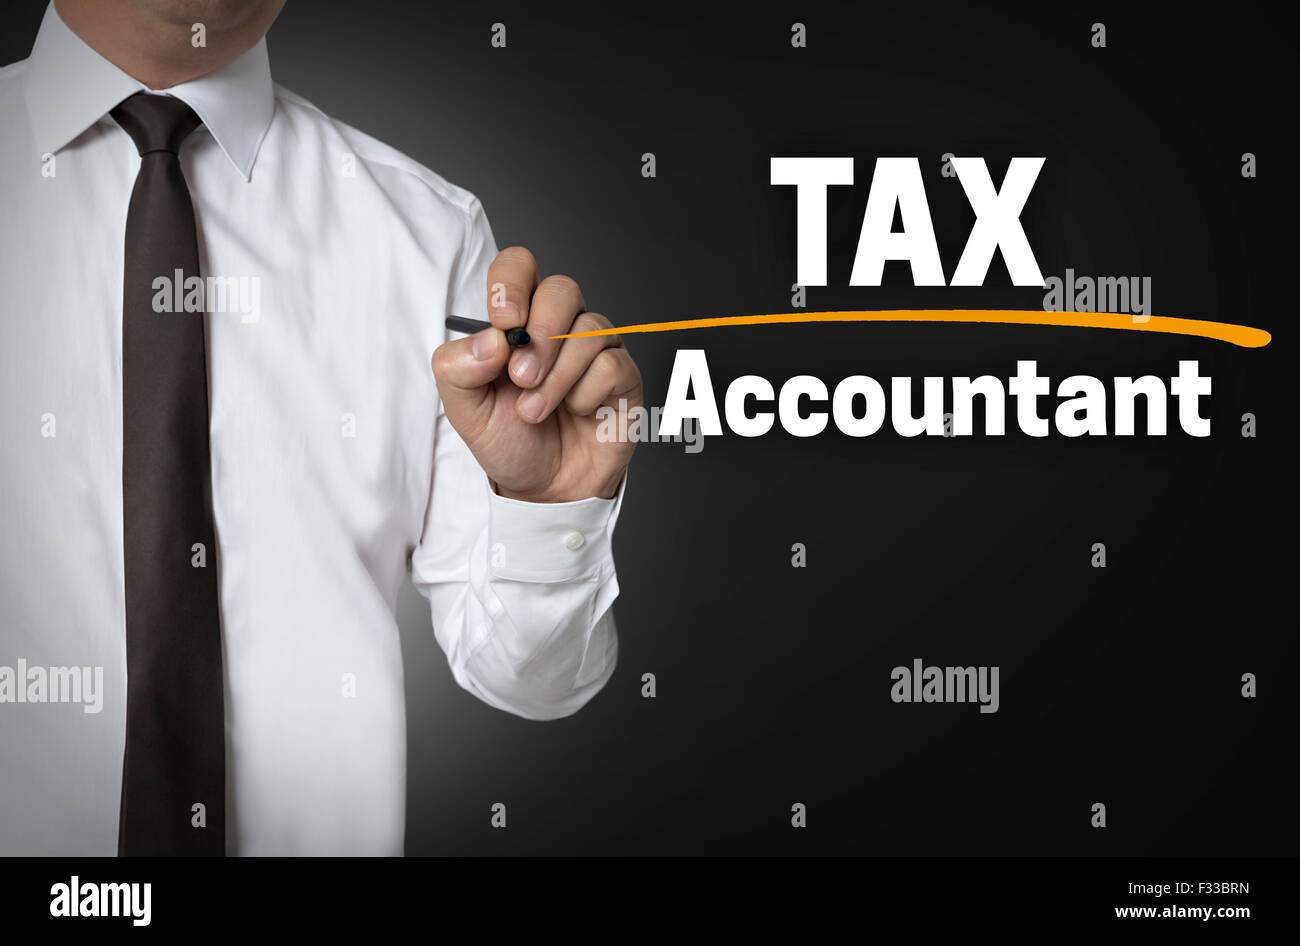 Tax accountant is written by businessman background concept. Stock Photo